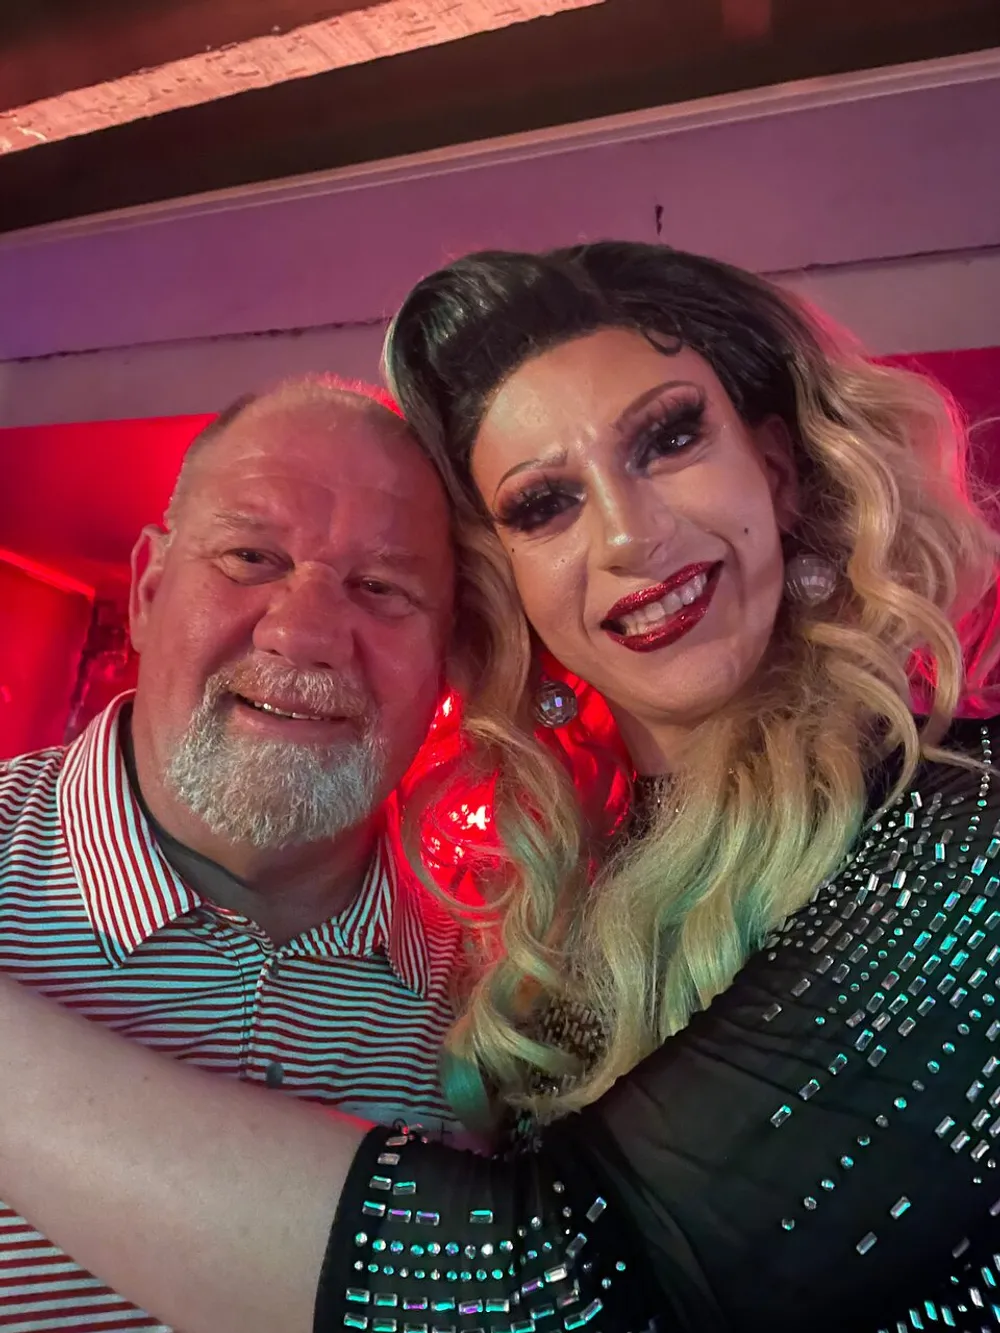 A man and a drag queen with glamorous makeup and a sequined outfit are posing together for a selfie with a red lit background